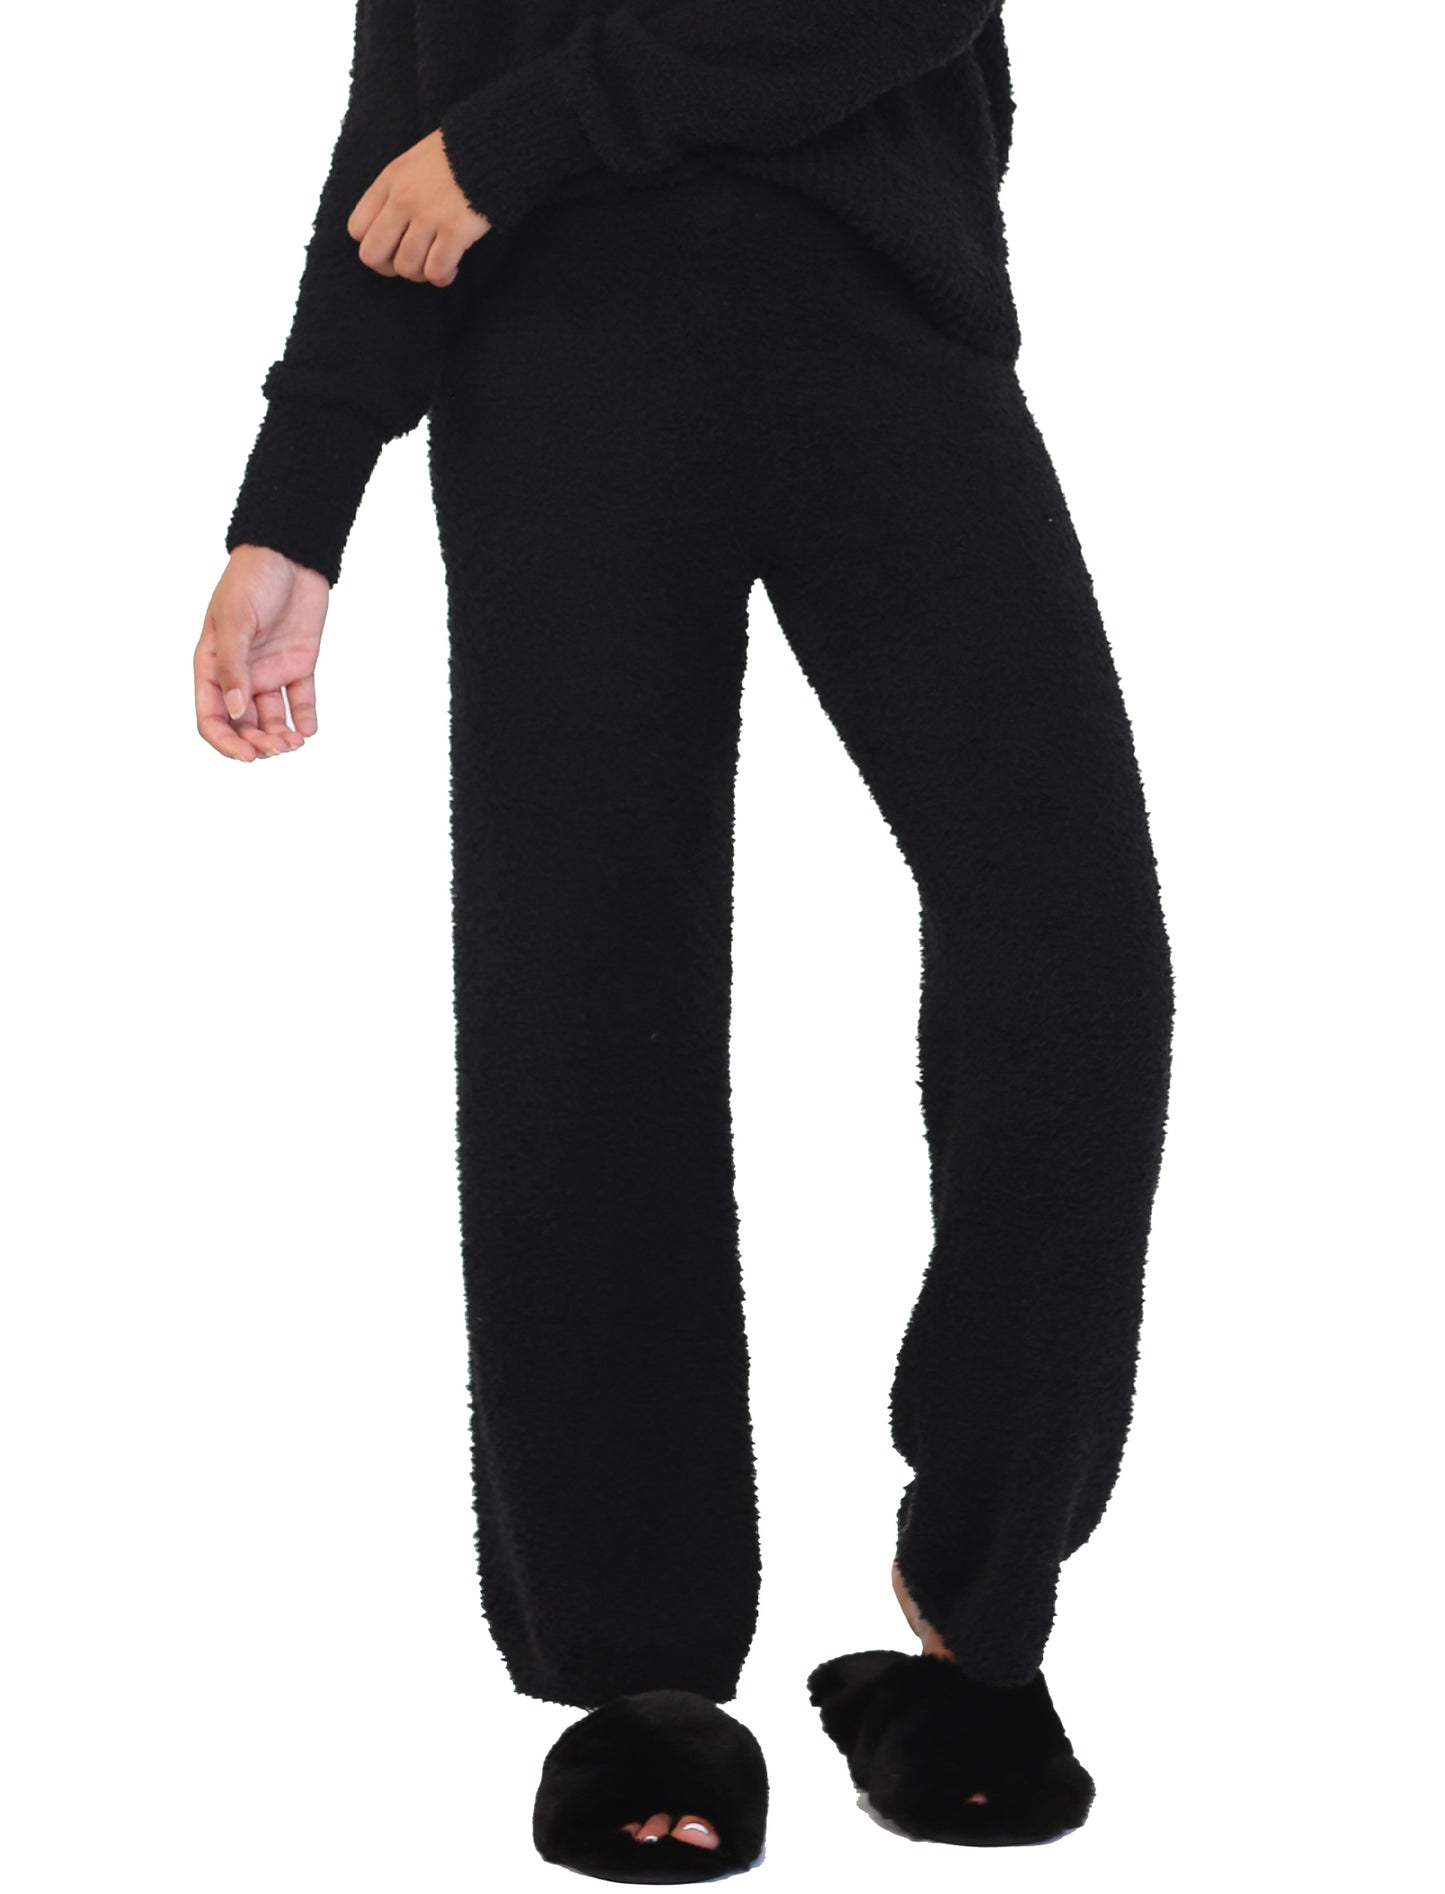 Cozy Knit Pant in Black